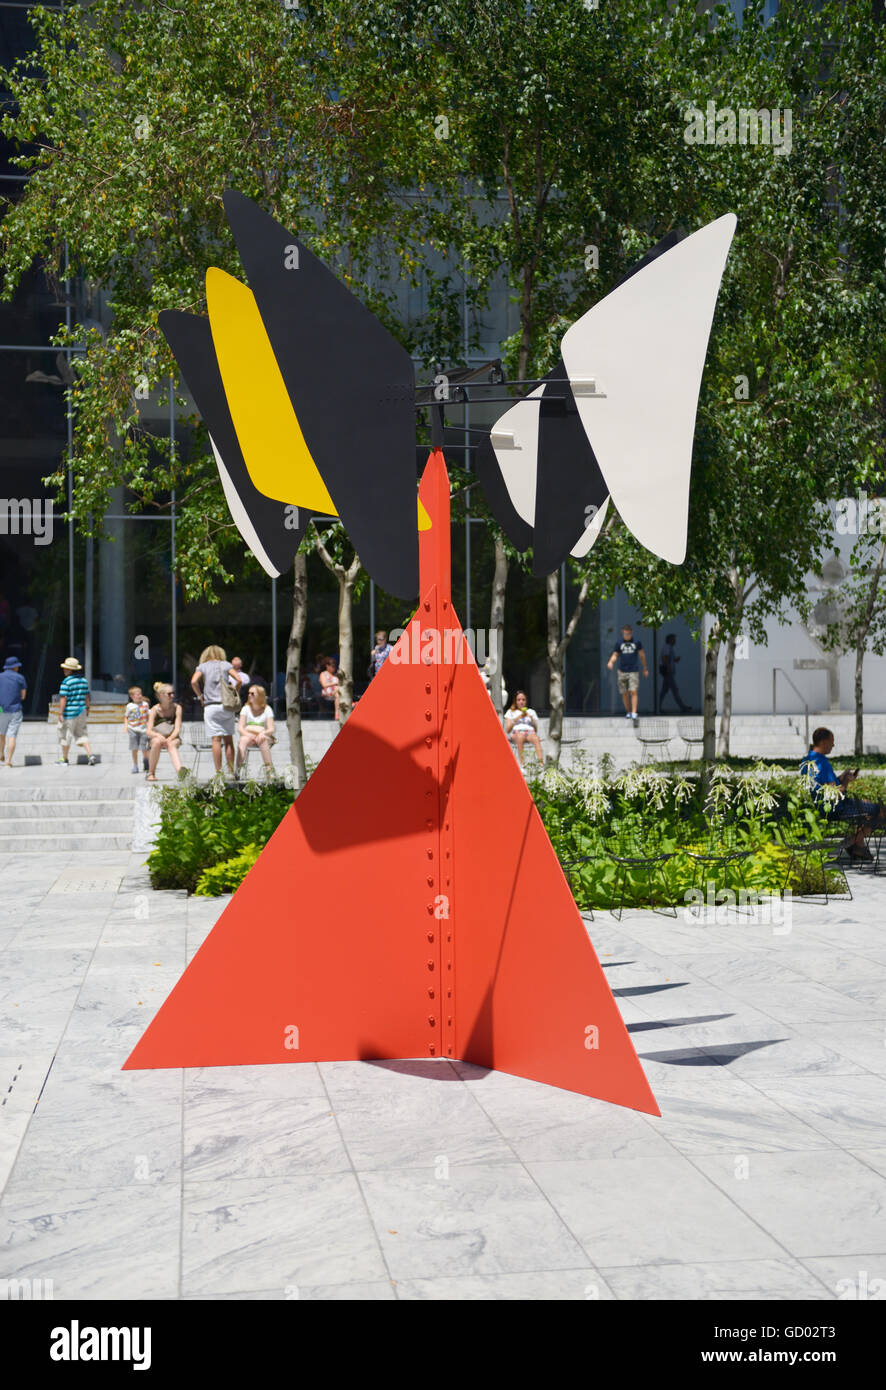 Sandy's Butterfly, 1964, by Alexander Calder, sculpture garden at MOMA, NYC Stock Photo